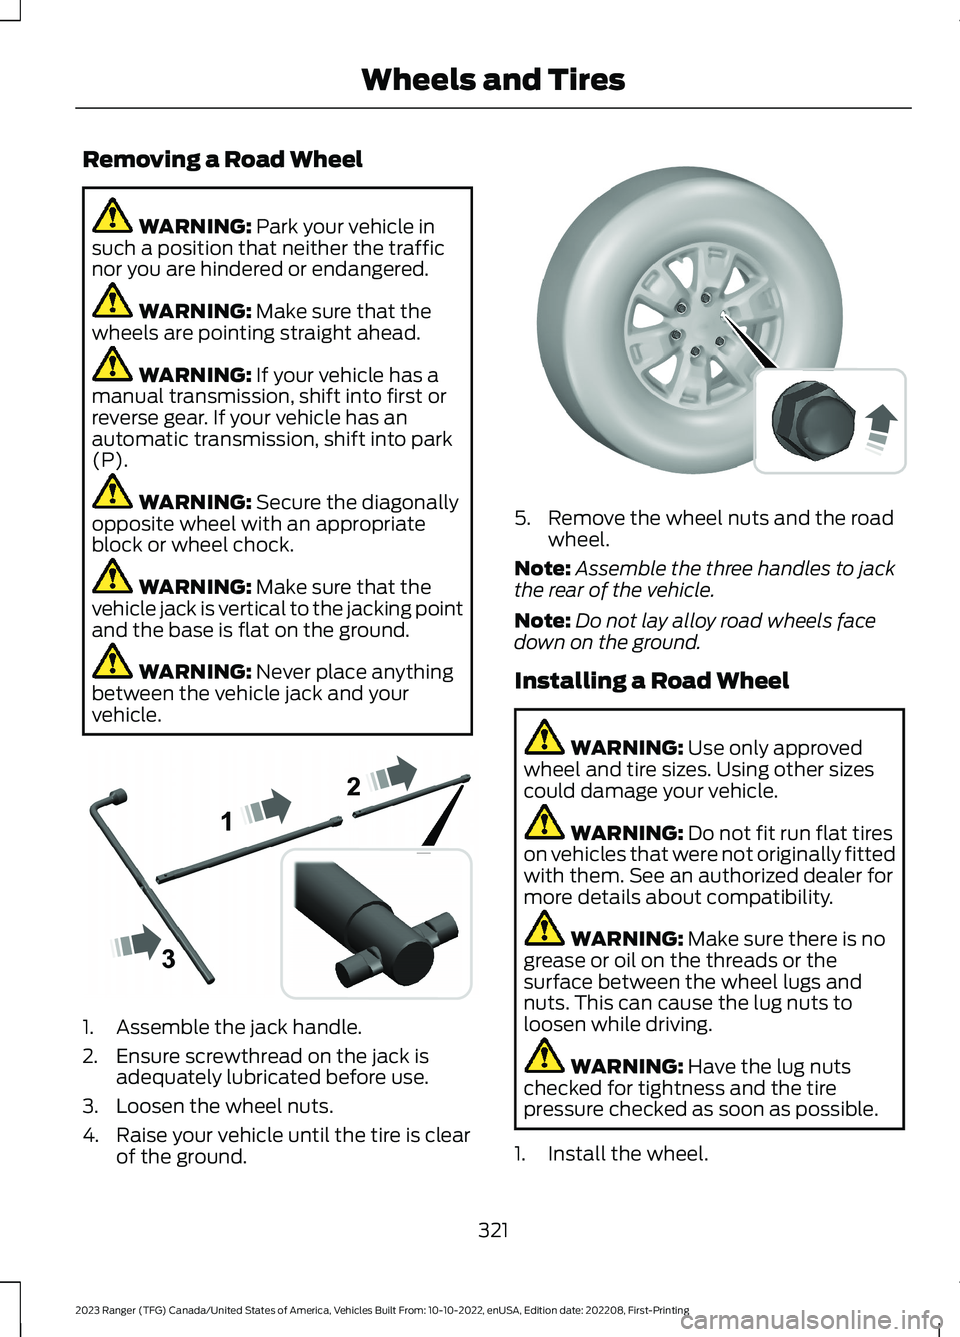 FORD RANGER 2023  Owners Manual Removing a Road Wheel
WARNING: Park your vehicle insuch a position that neither the trafficnor you are hindered or endangered.
WARNING: Make sure that thewheels are pointing straight ahead.
WARNING: I